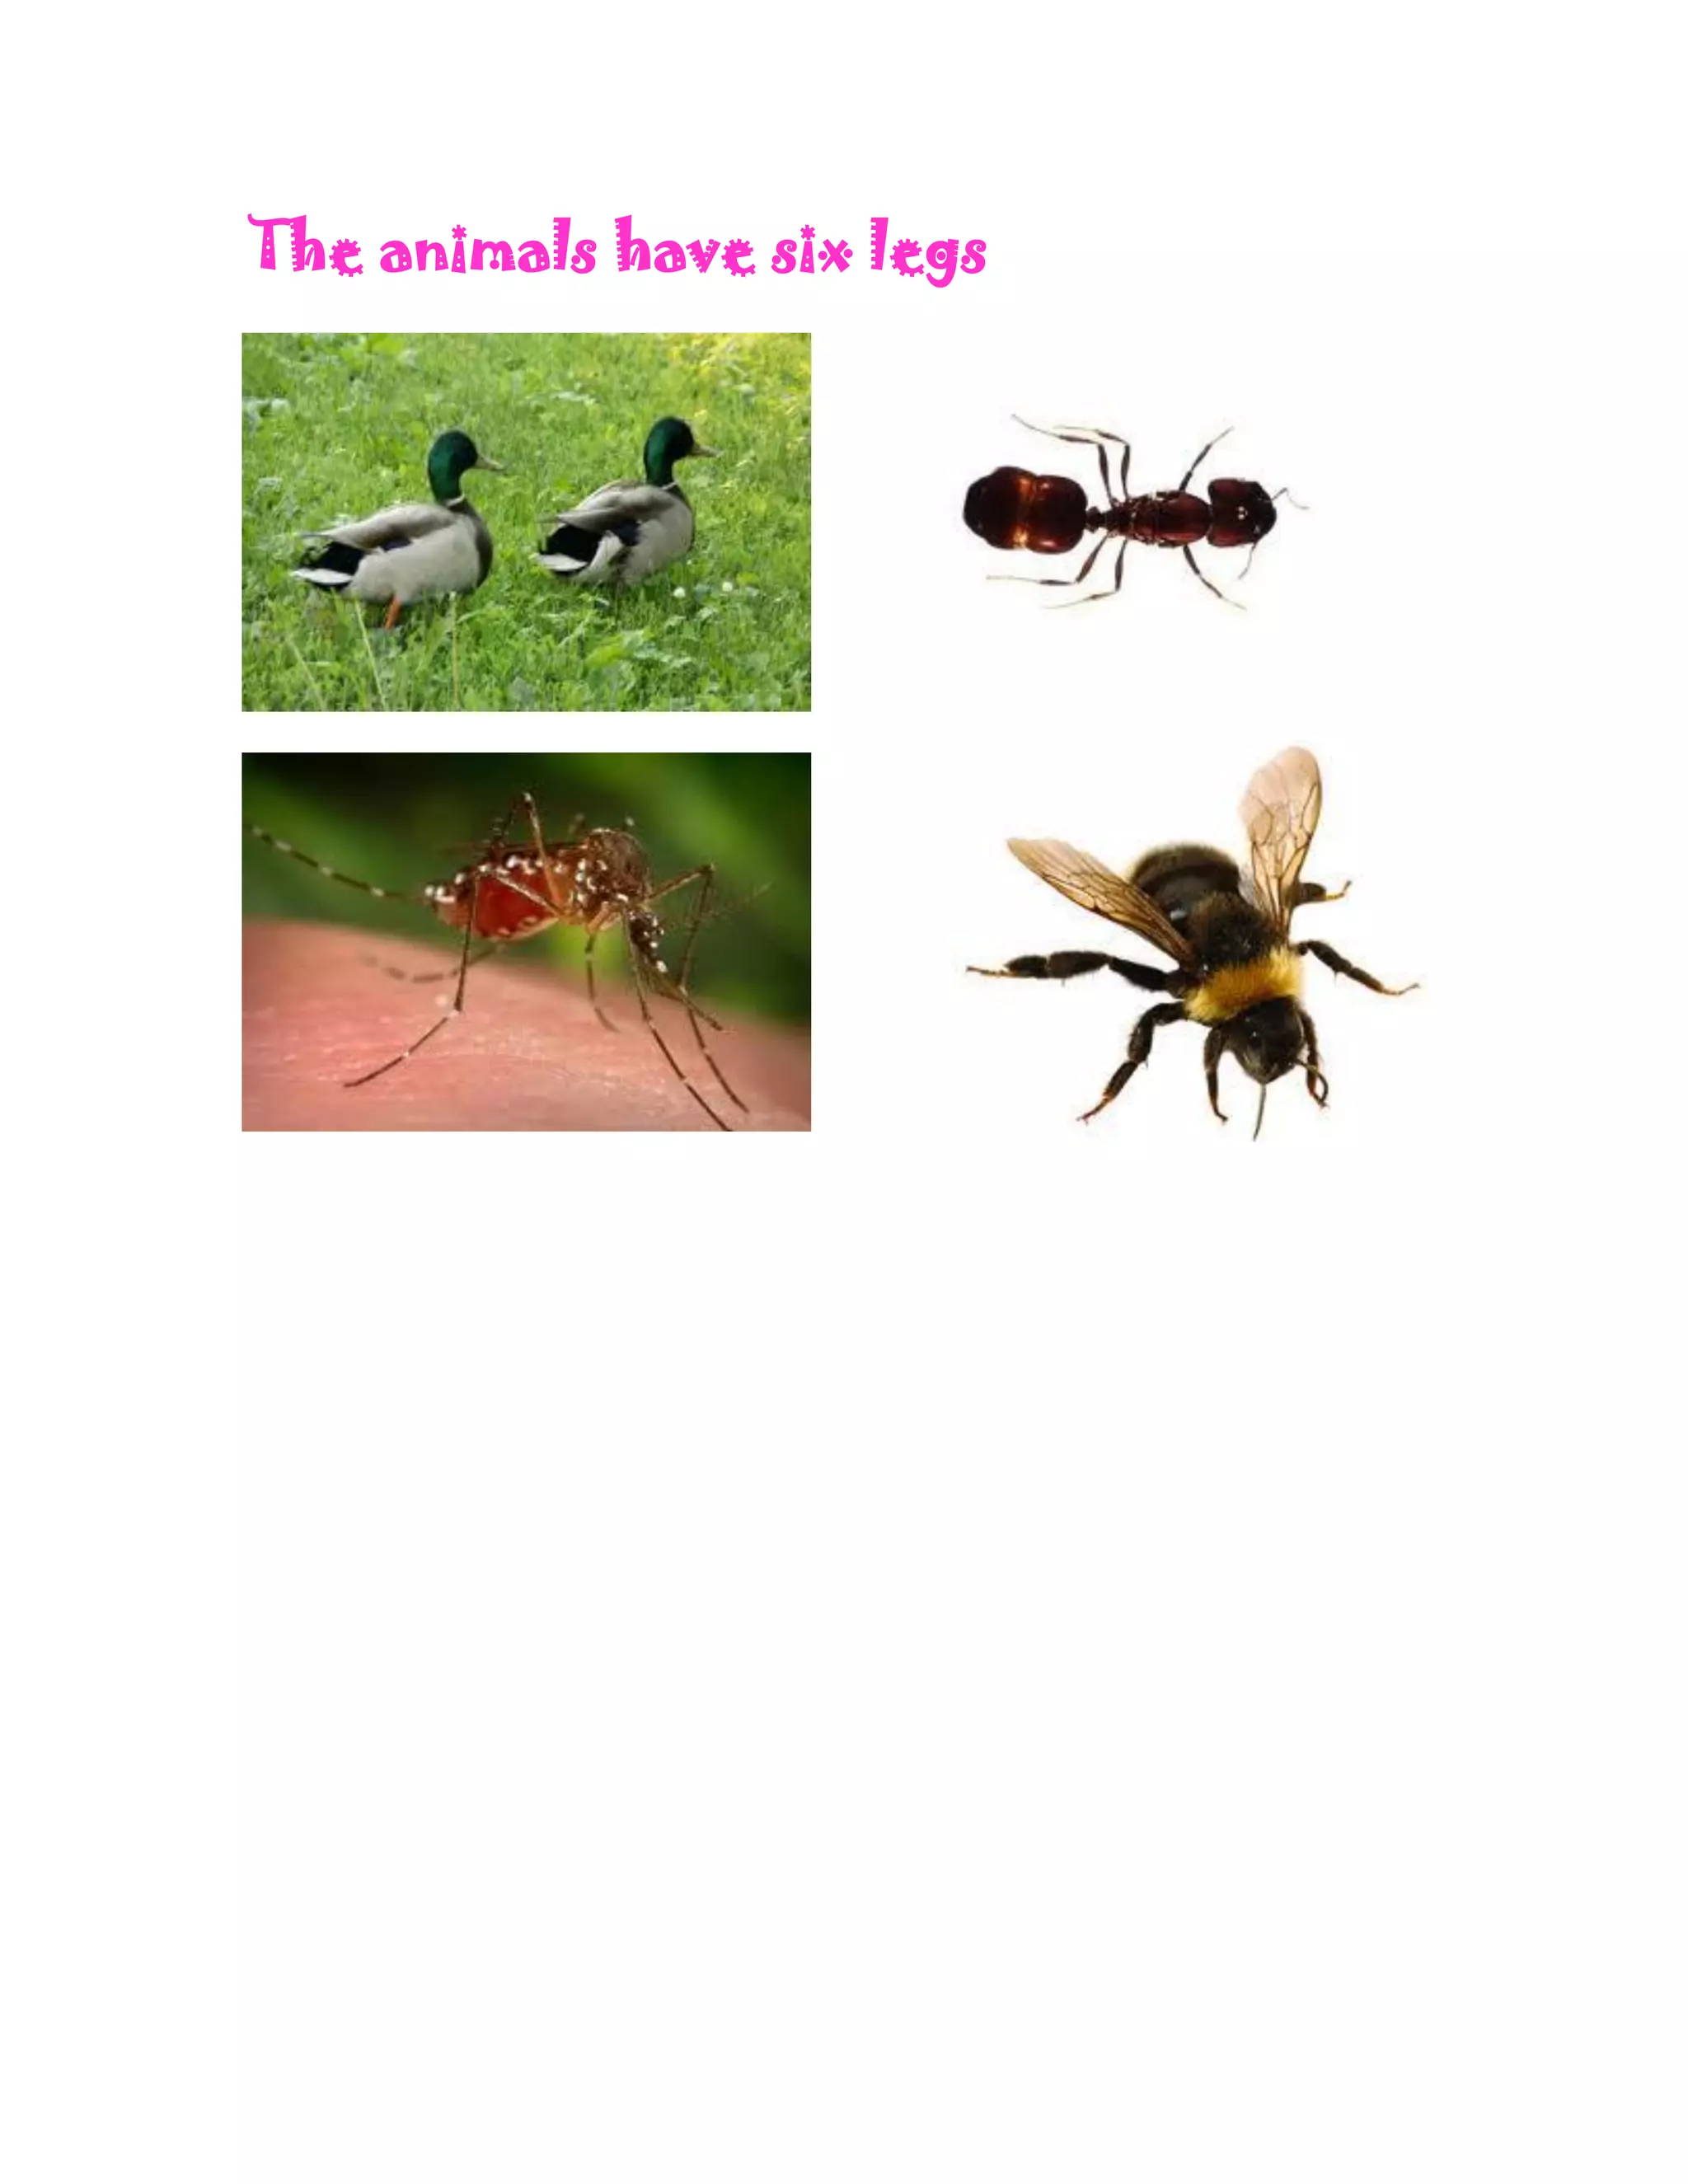 Grouping animals that have legs